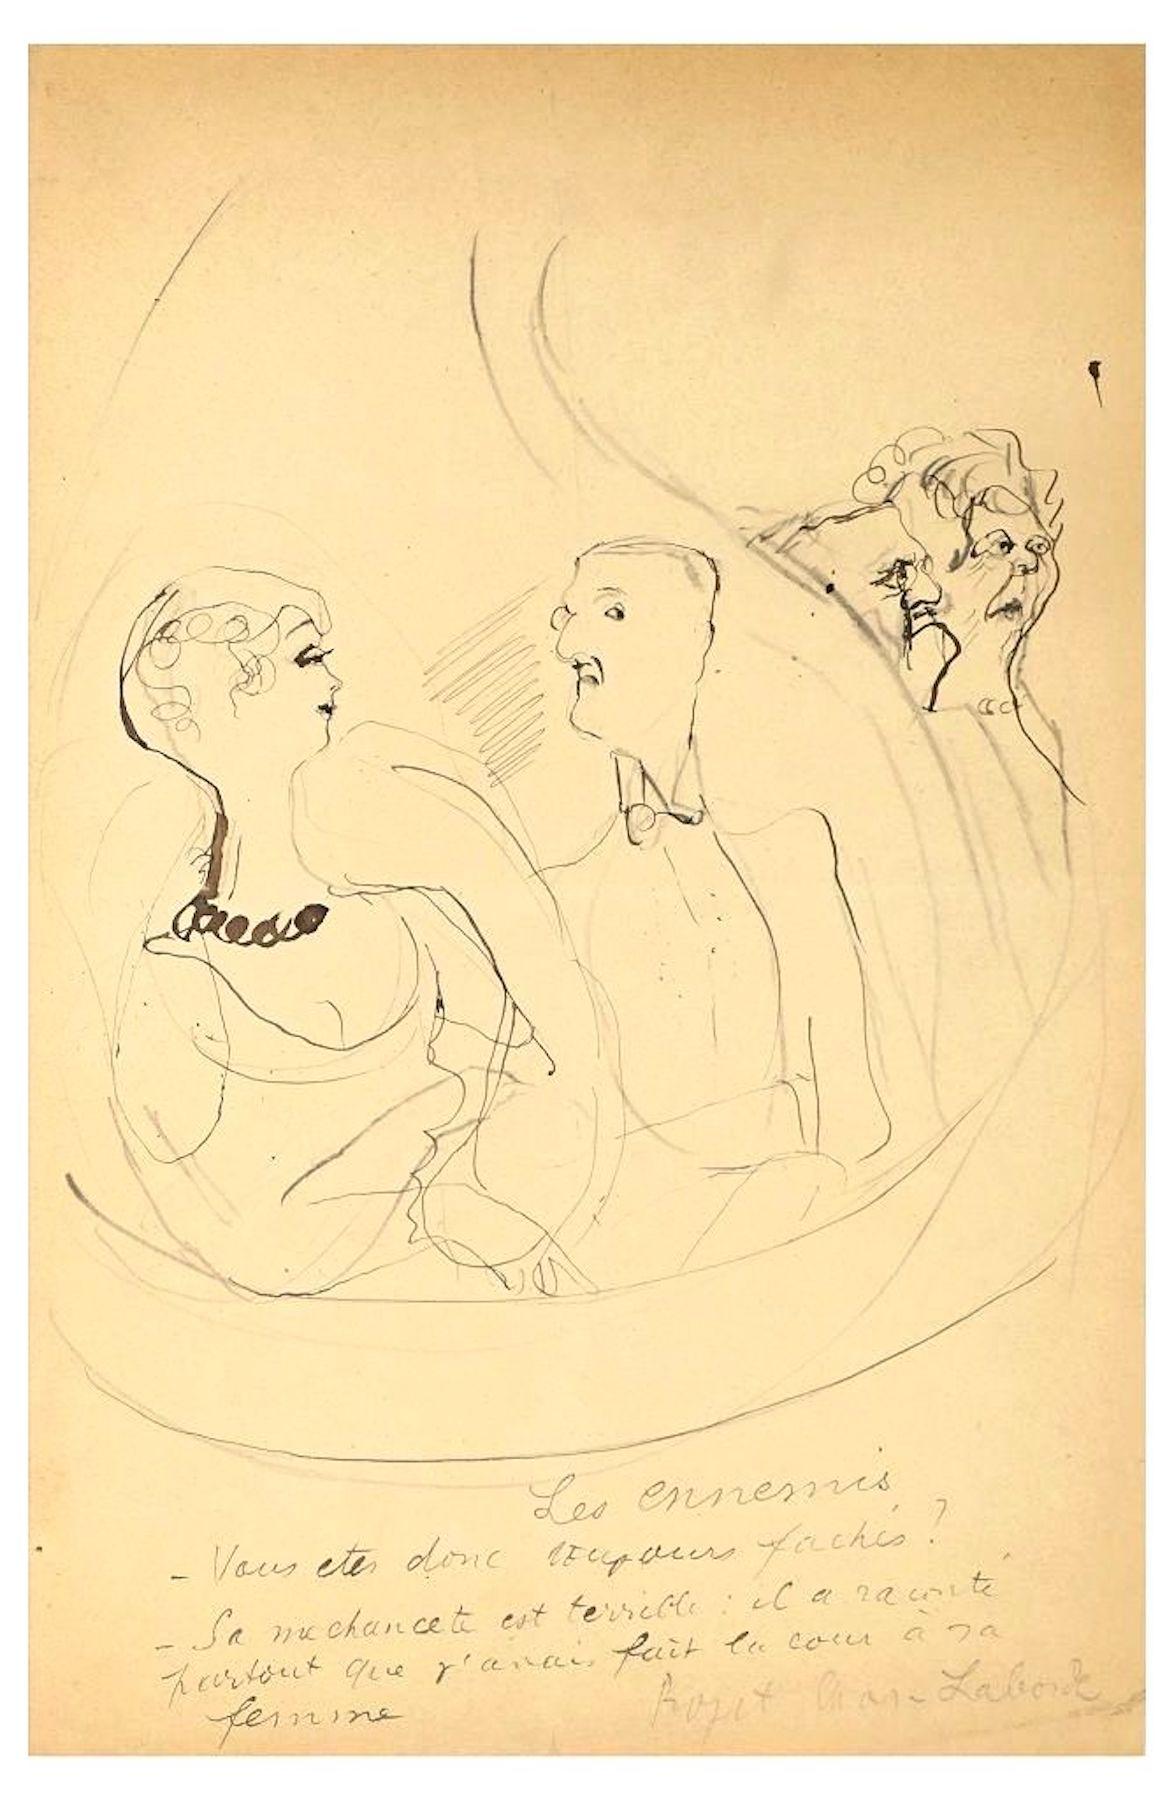 People Conversation is an original artwork realized in the first half of the XX century by Chas Laborde.

Original black and white drawing. 

Hand-signed on the lower-right corner. 

On the lower right is "noted Les ennemis - vous êtes toujours